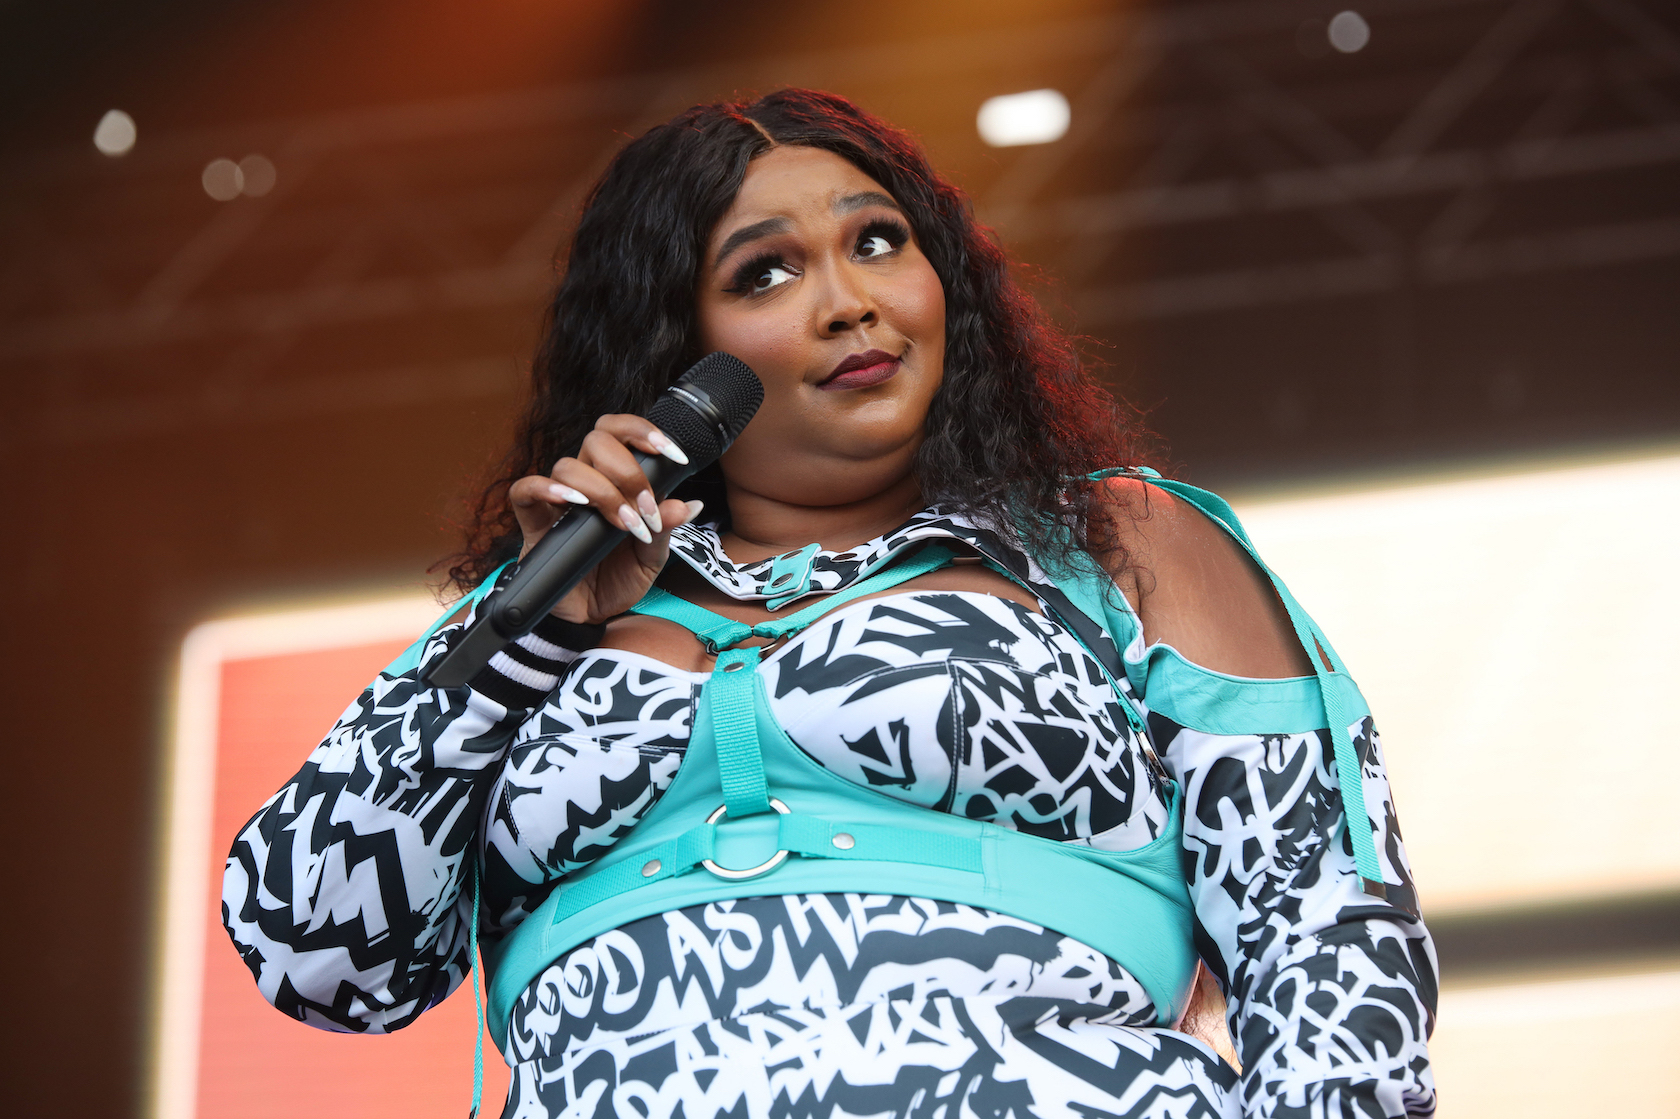 Lizzo performs at FOMO Festival 2020 at The Trusts Arena